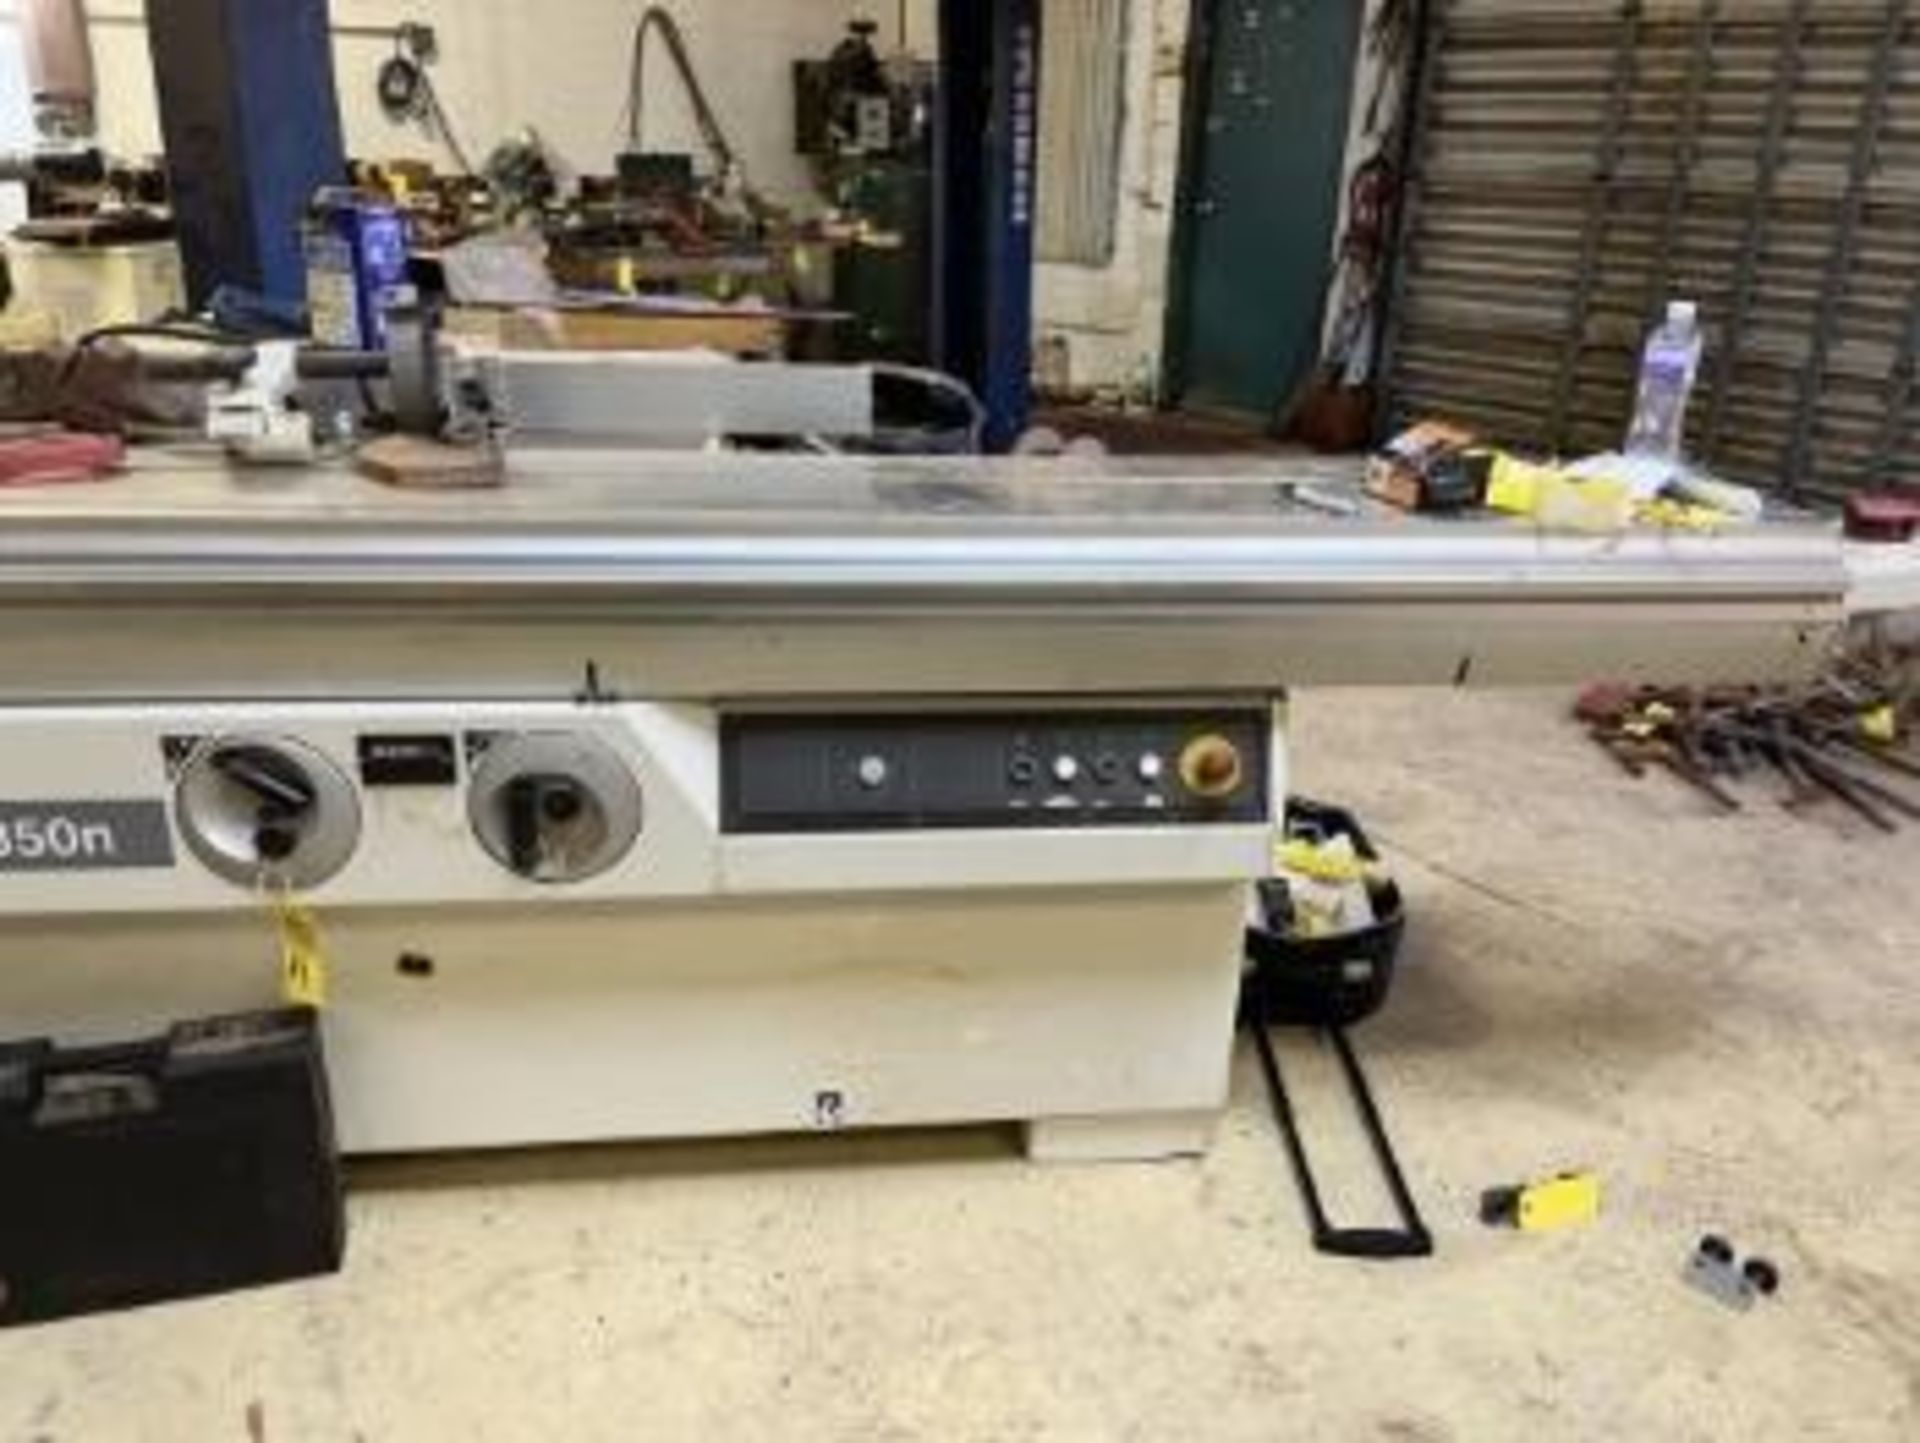 SCMI Si350n SLIDING TABLE SAW WITH TILT, FENCE & SCORING BLADE - 220 / 3 PHASE - Image 3 of 8